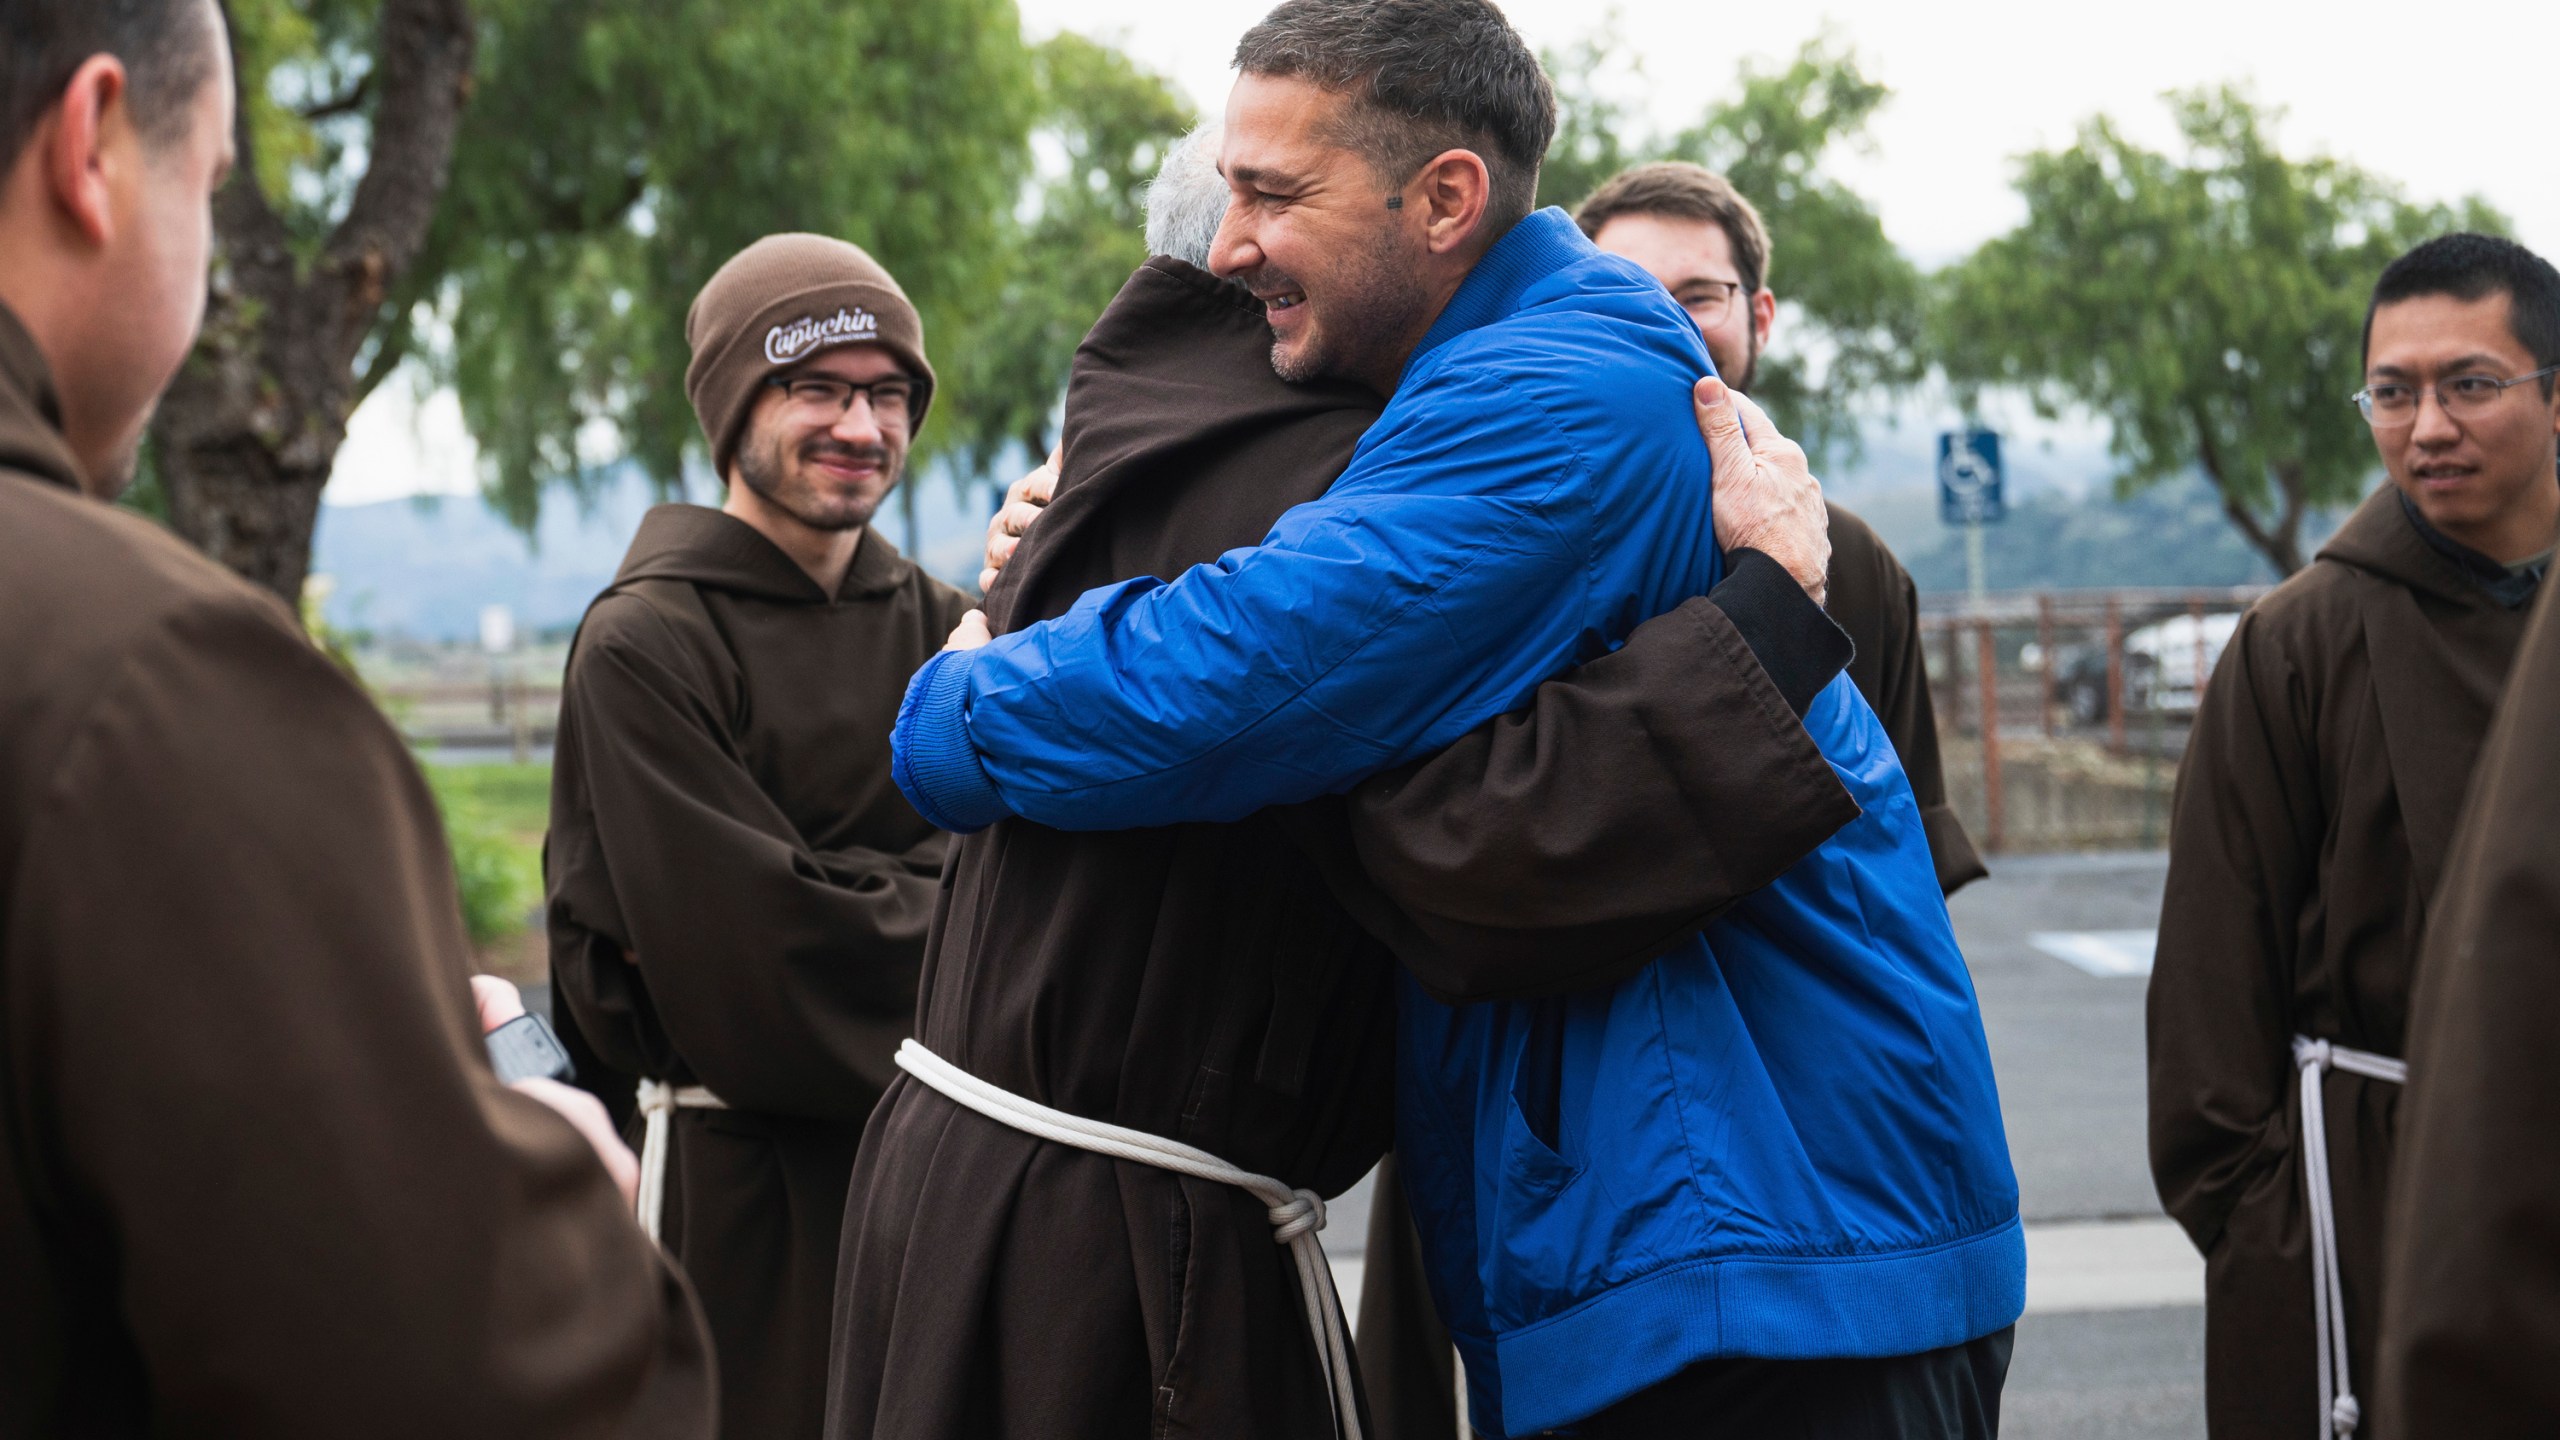 In this photo provided by Word on Fire Catholic Ministries, actor Shia LaBeouf celebrates his Catholic confirmation outside Old Mission Santa Inés Parish in Solvang, Calif., on Sunday, Dec. 31, 2023. “The Capuchin Franciscan friars are overjoyed to welcome him into the fold and witness his deep commitment to his faith journey,” the Catholic religious order said. (Word on Fire Catholic Ministries via AP)